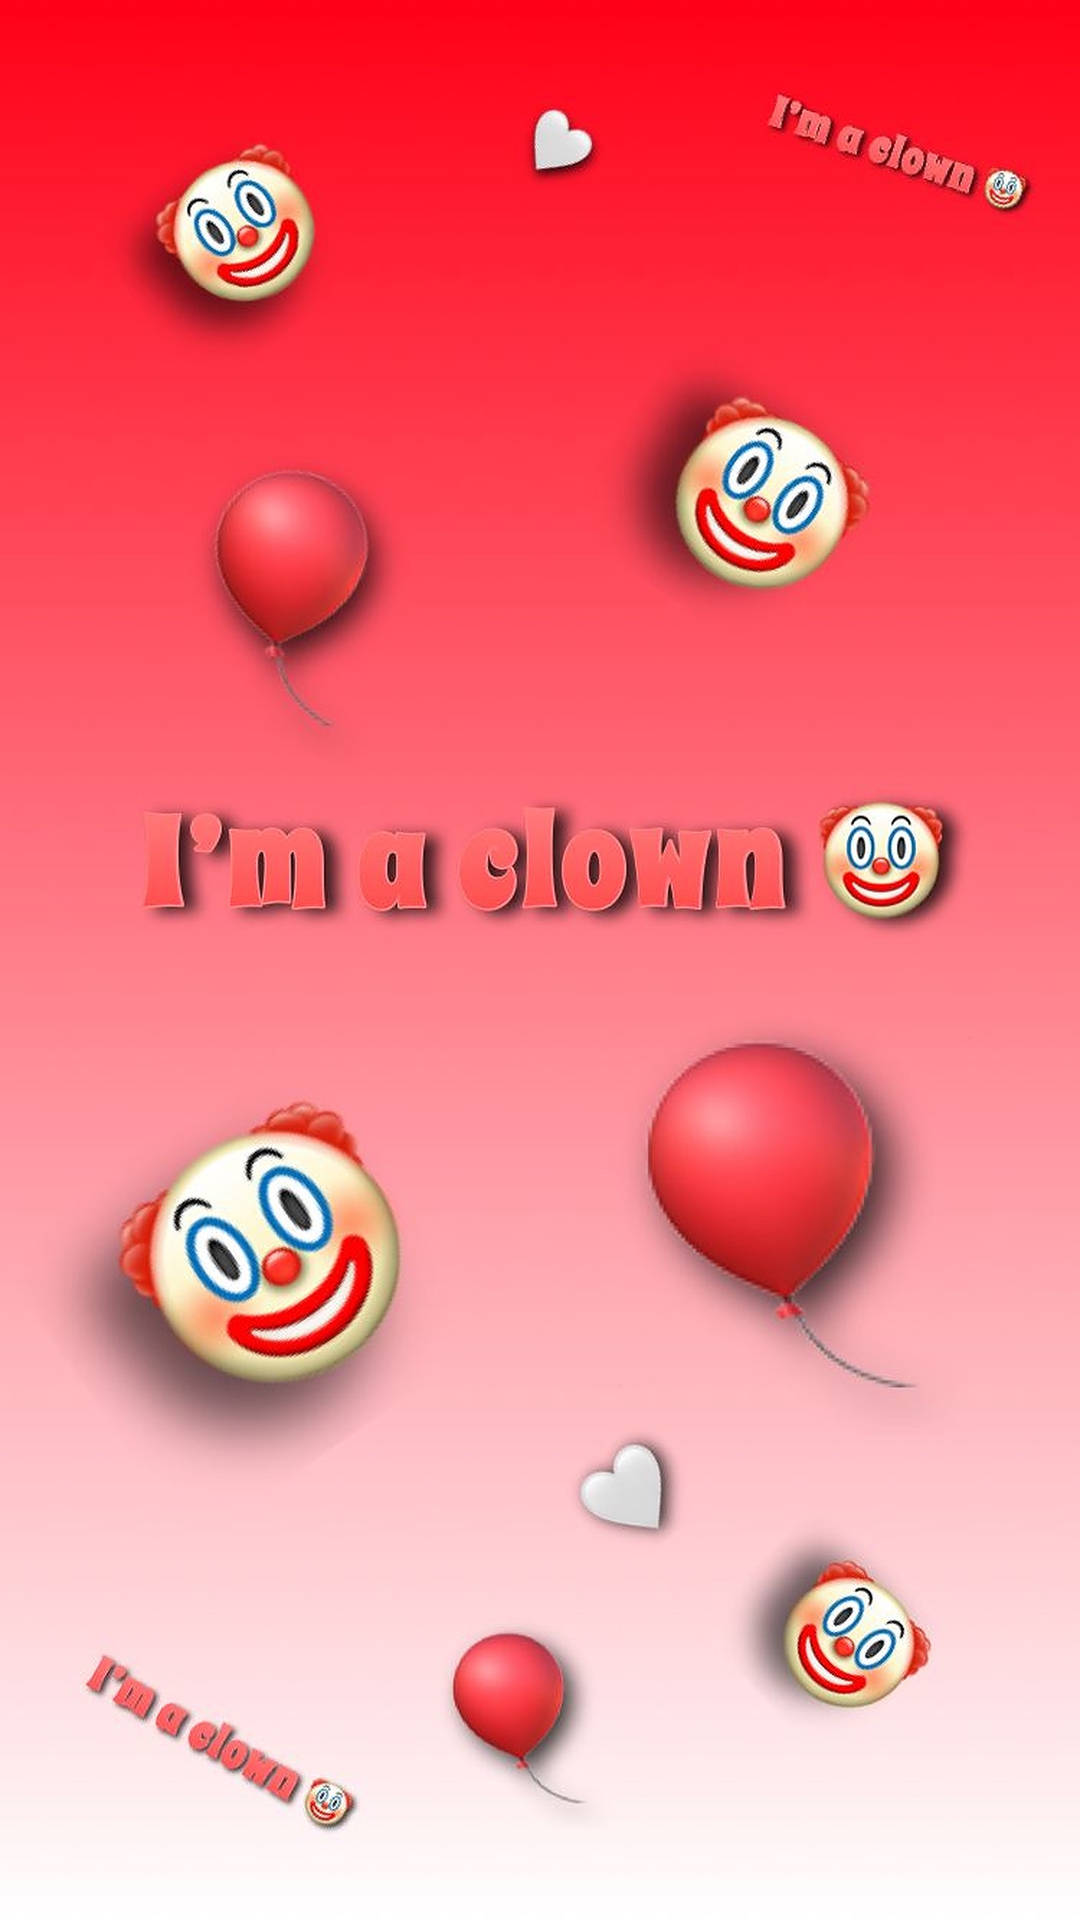 Colorful Expressions Of A Clown